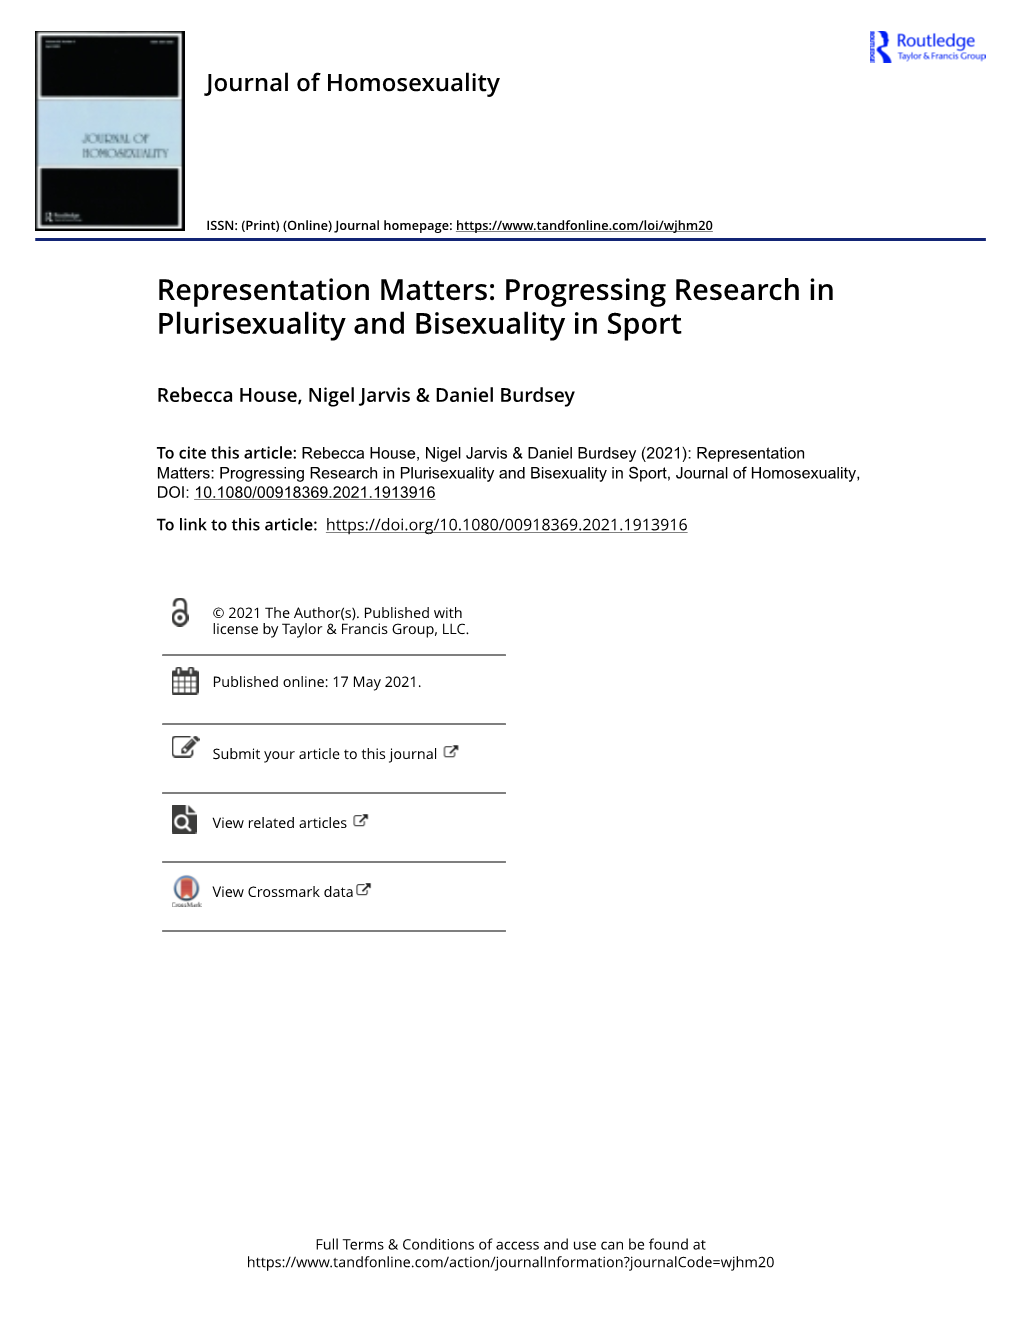 Progressing Research in Plurisexuality and Bisexuality in Sport